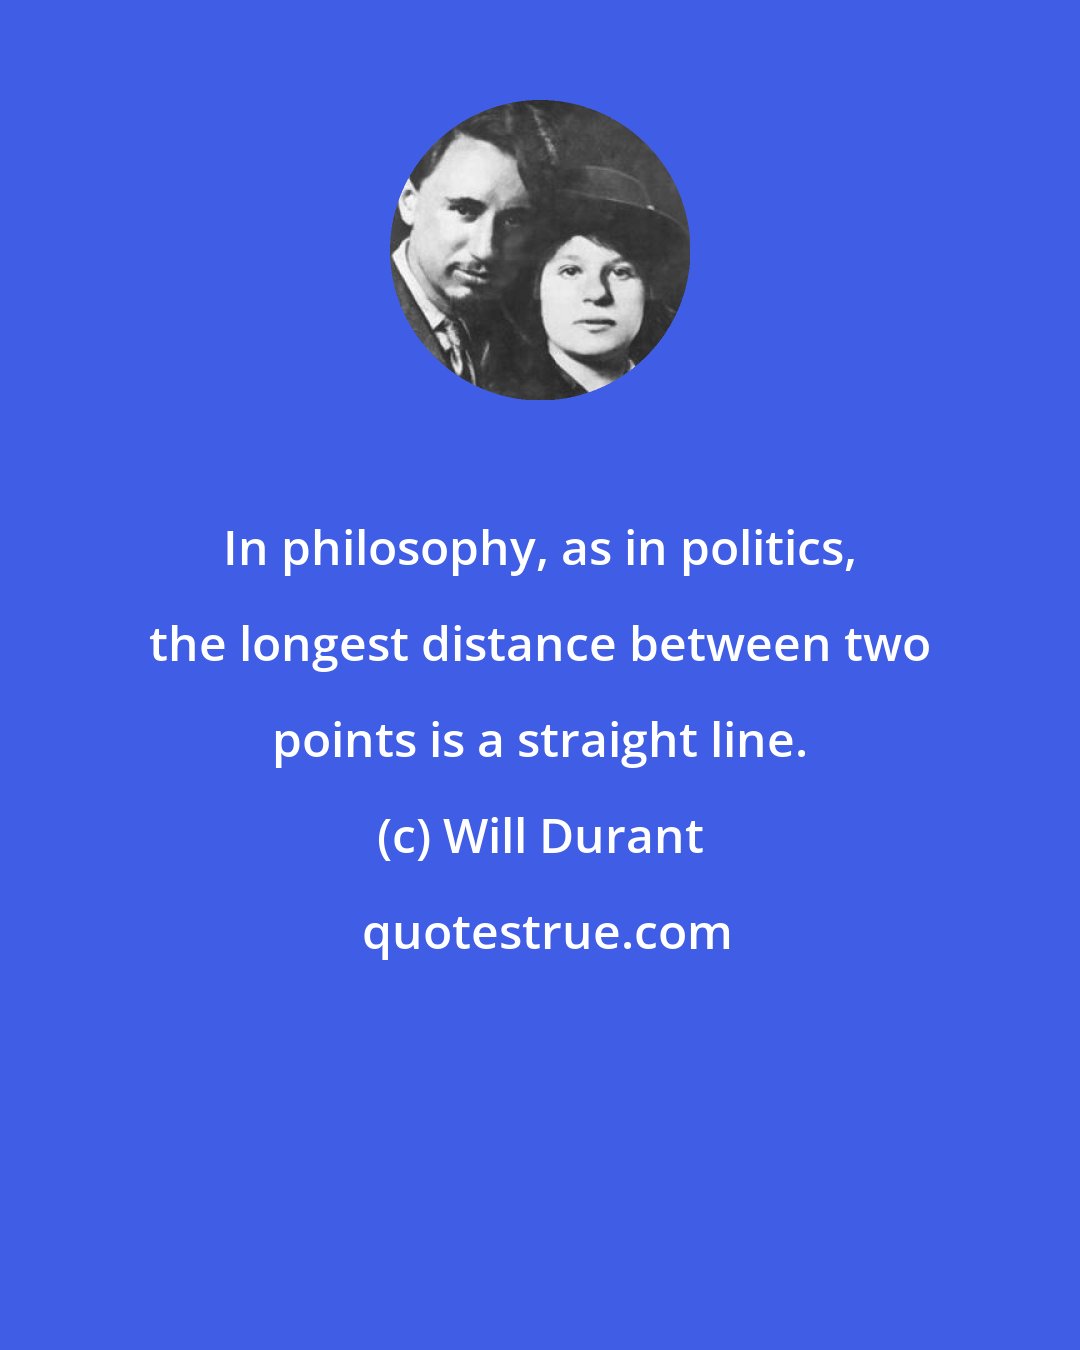 Will Durant: In philosophy, as in politics, the longest distance between two points is a straight line.